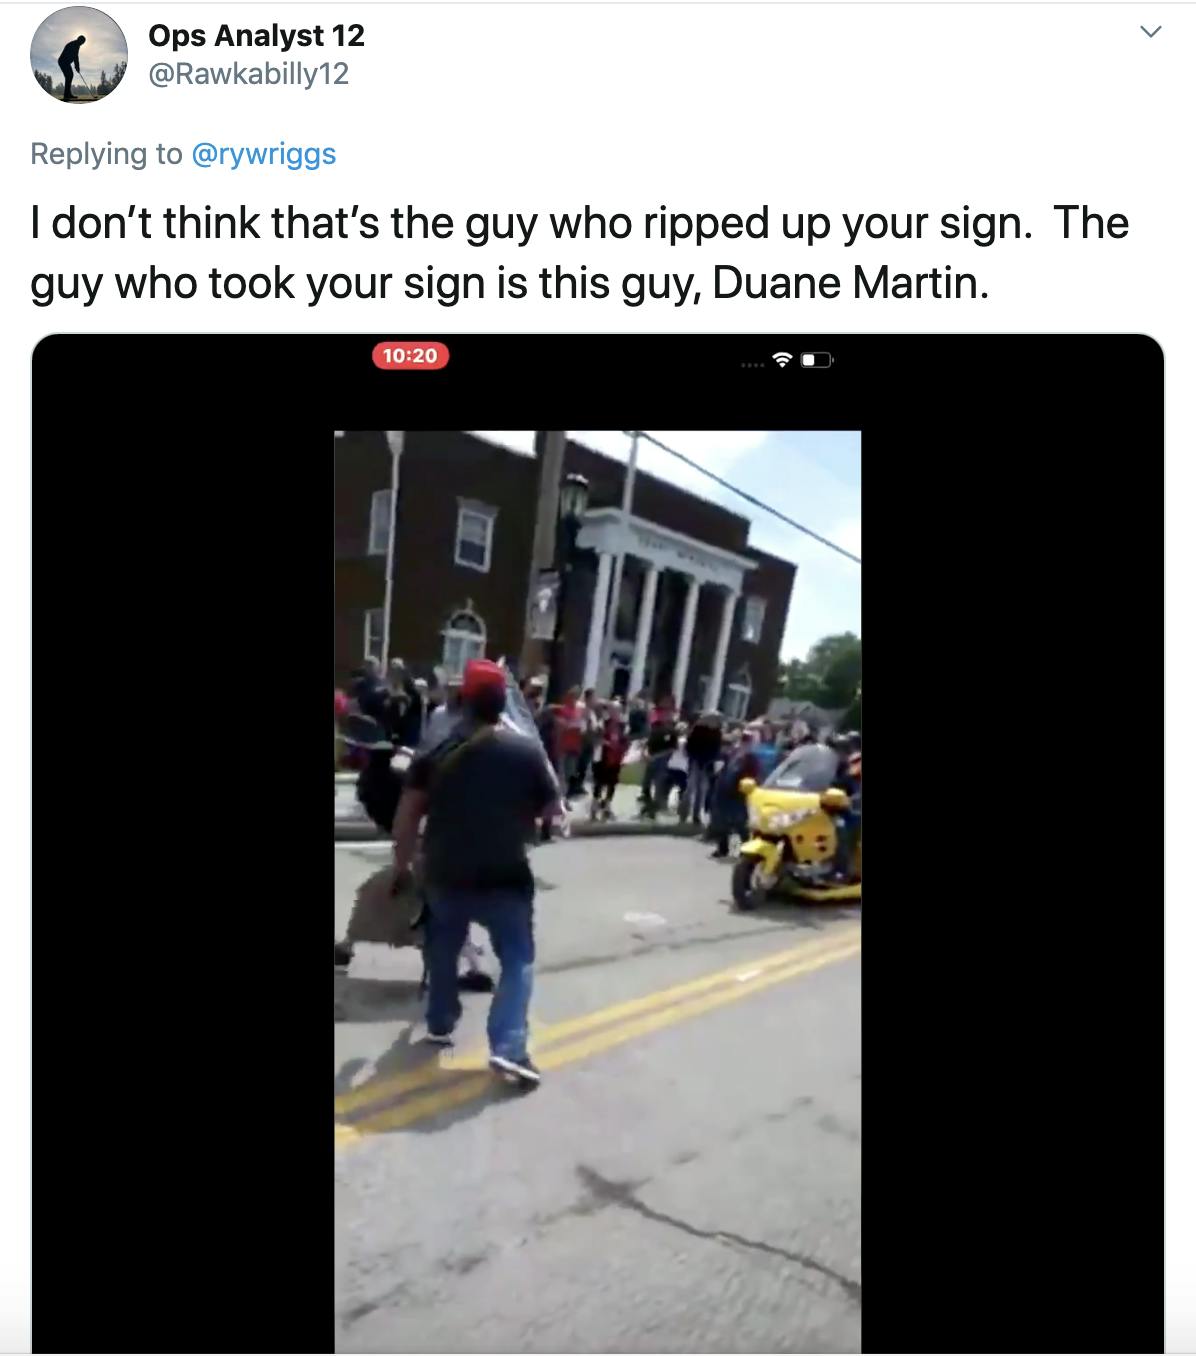 "I don’t think that’s the guy who ripped up your sign.  The guy who took your sign is this guy, Duane Martin." followed by an image of a man with a gun lunging at a protester